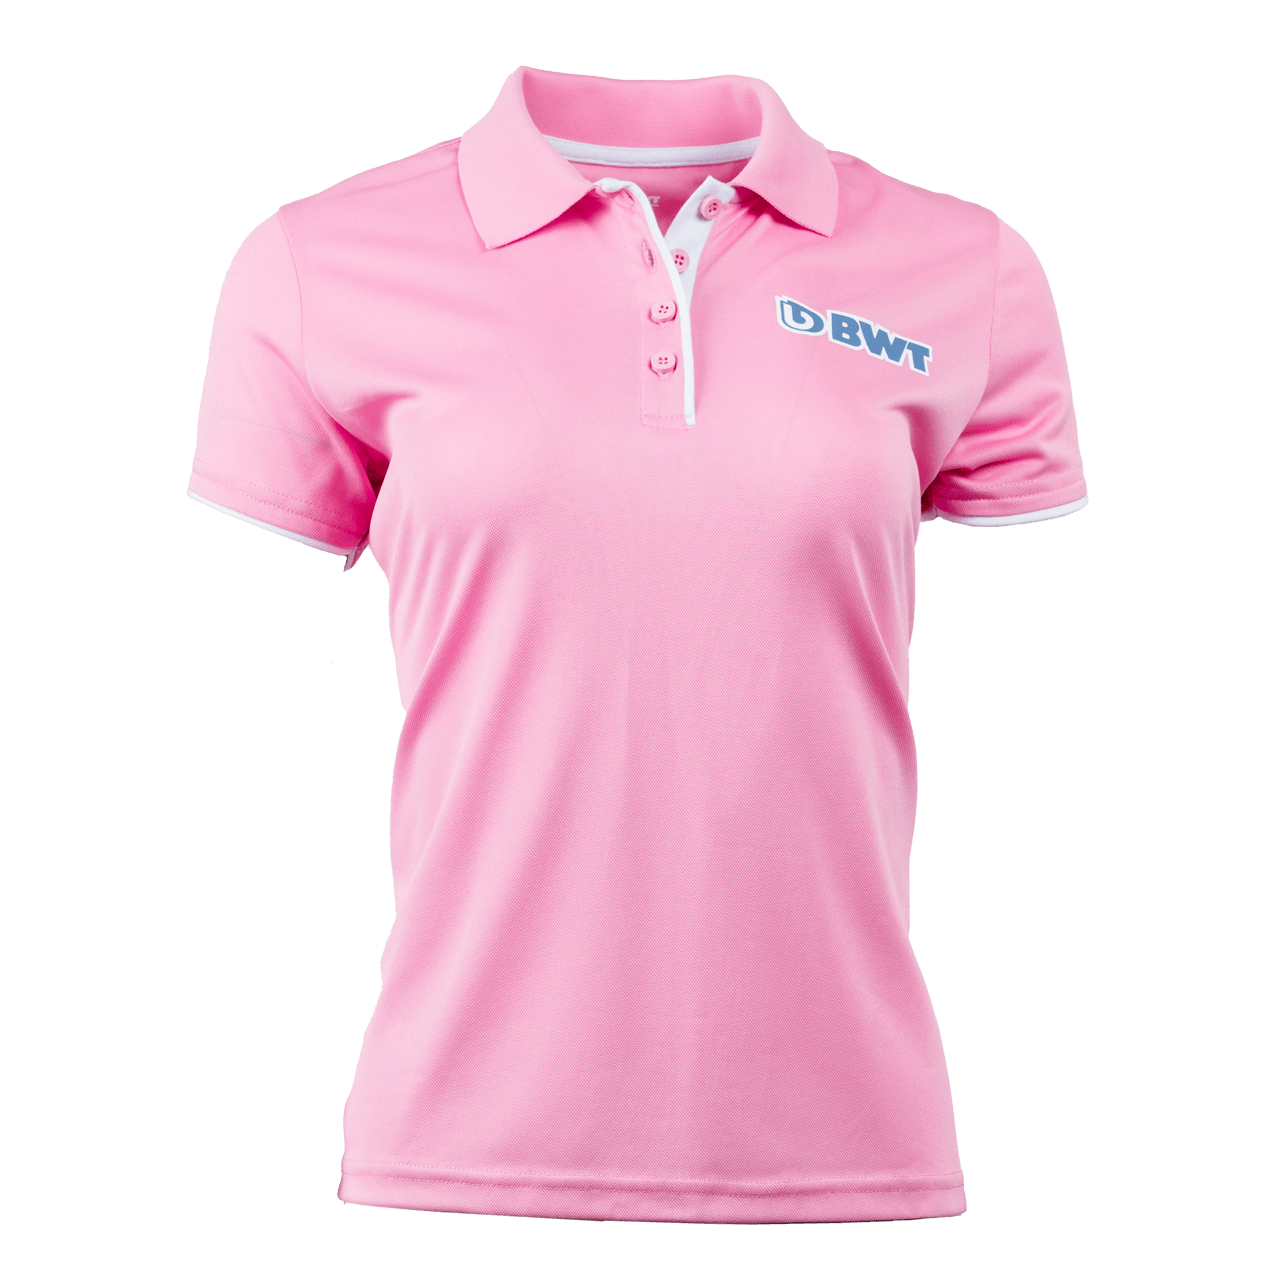 BWT Change the World Polo Function Ladies in pink with blue BWT logo